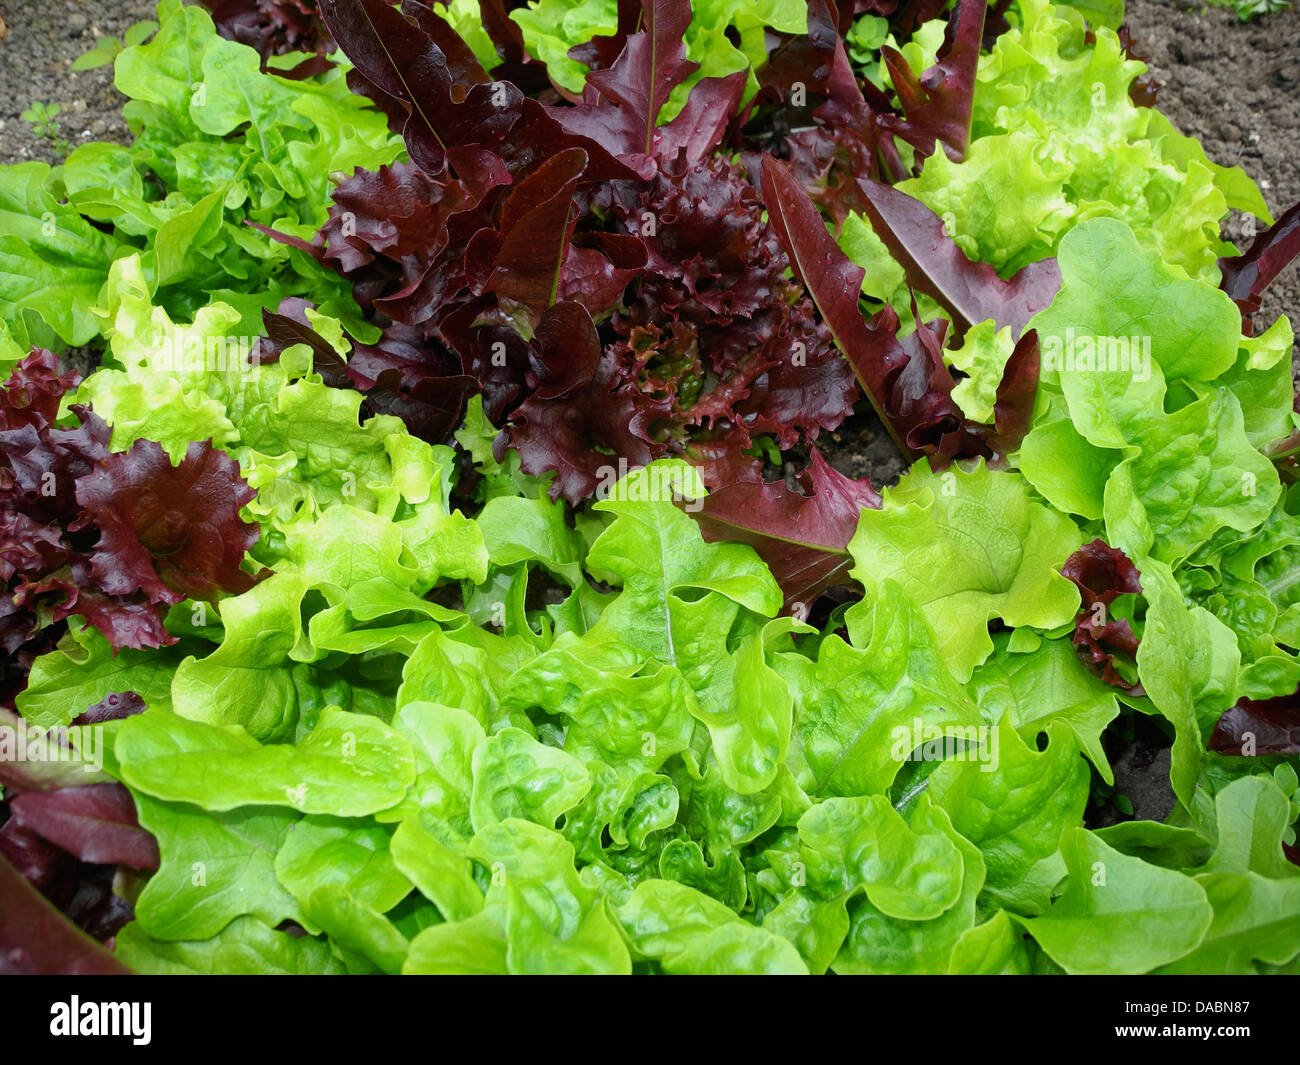 Colourful colorful salad leaf lettuce growing in a garden Stock Photo